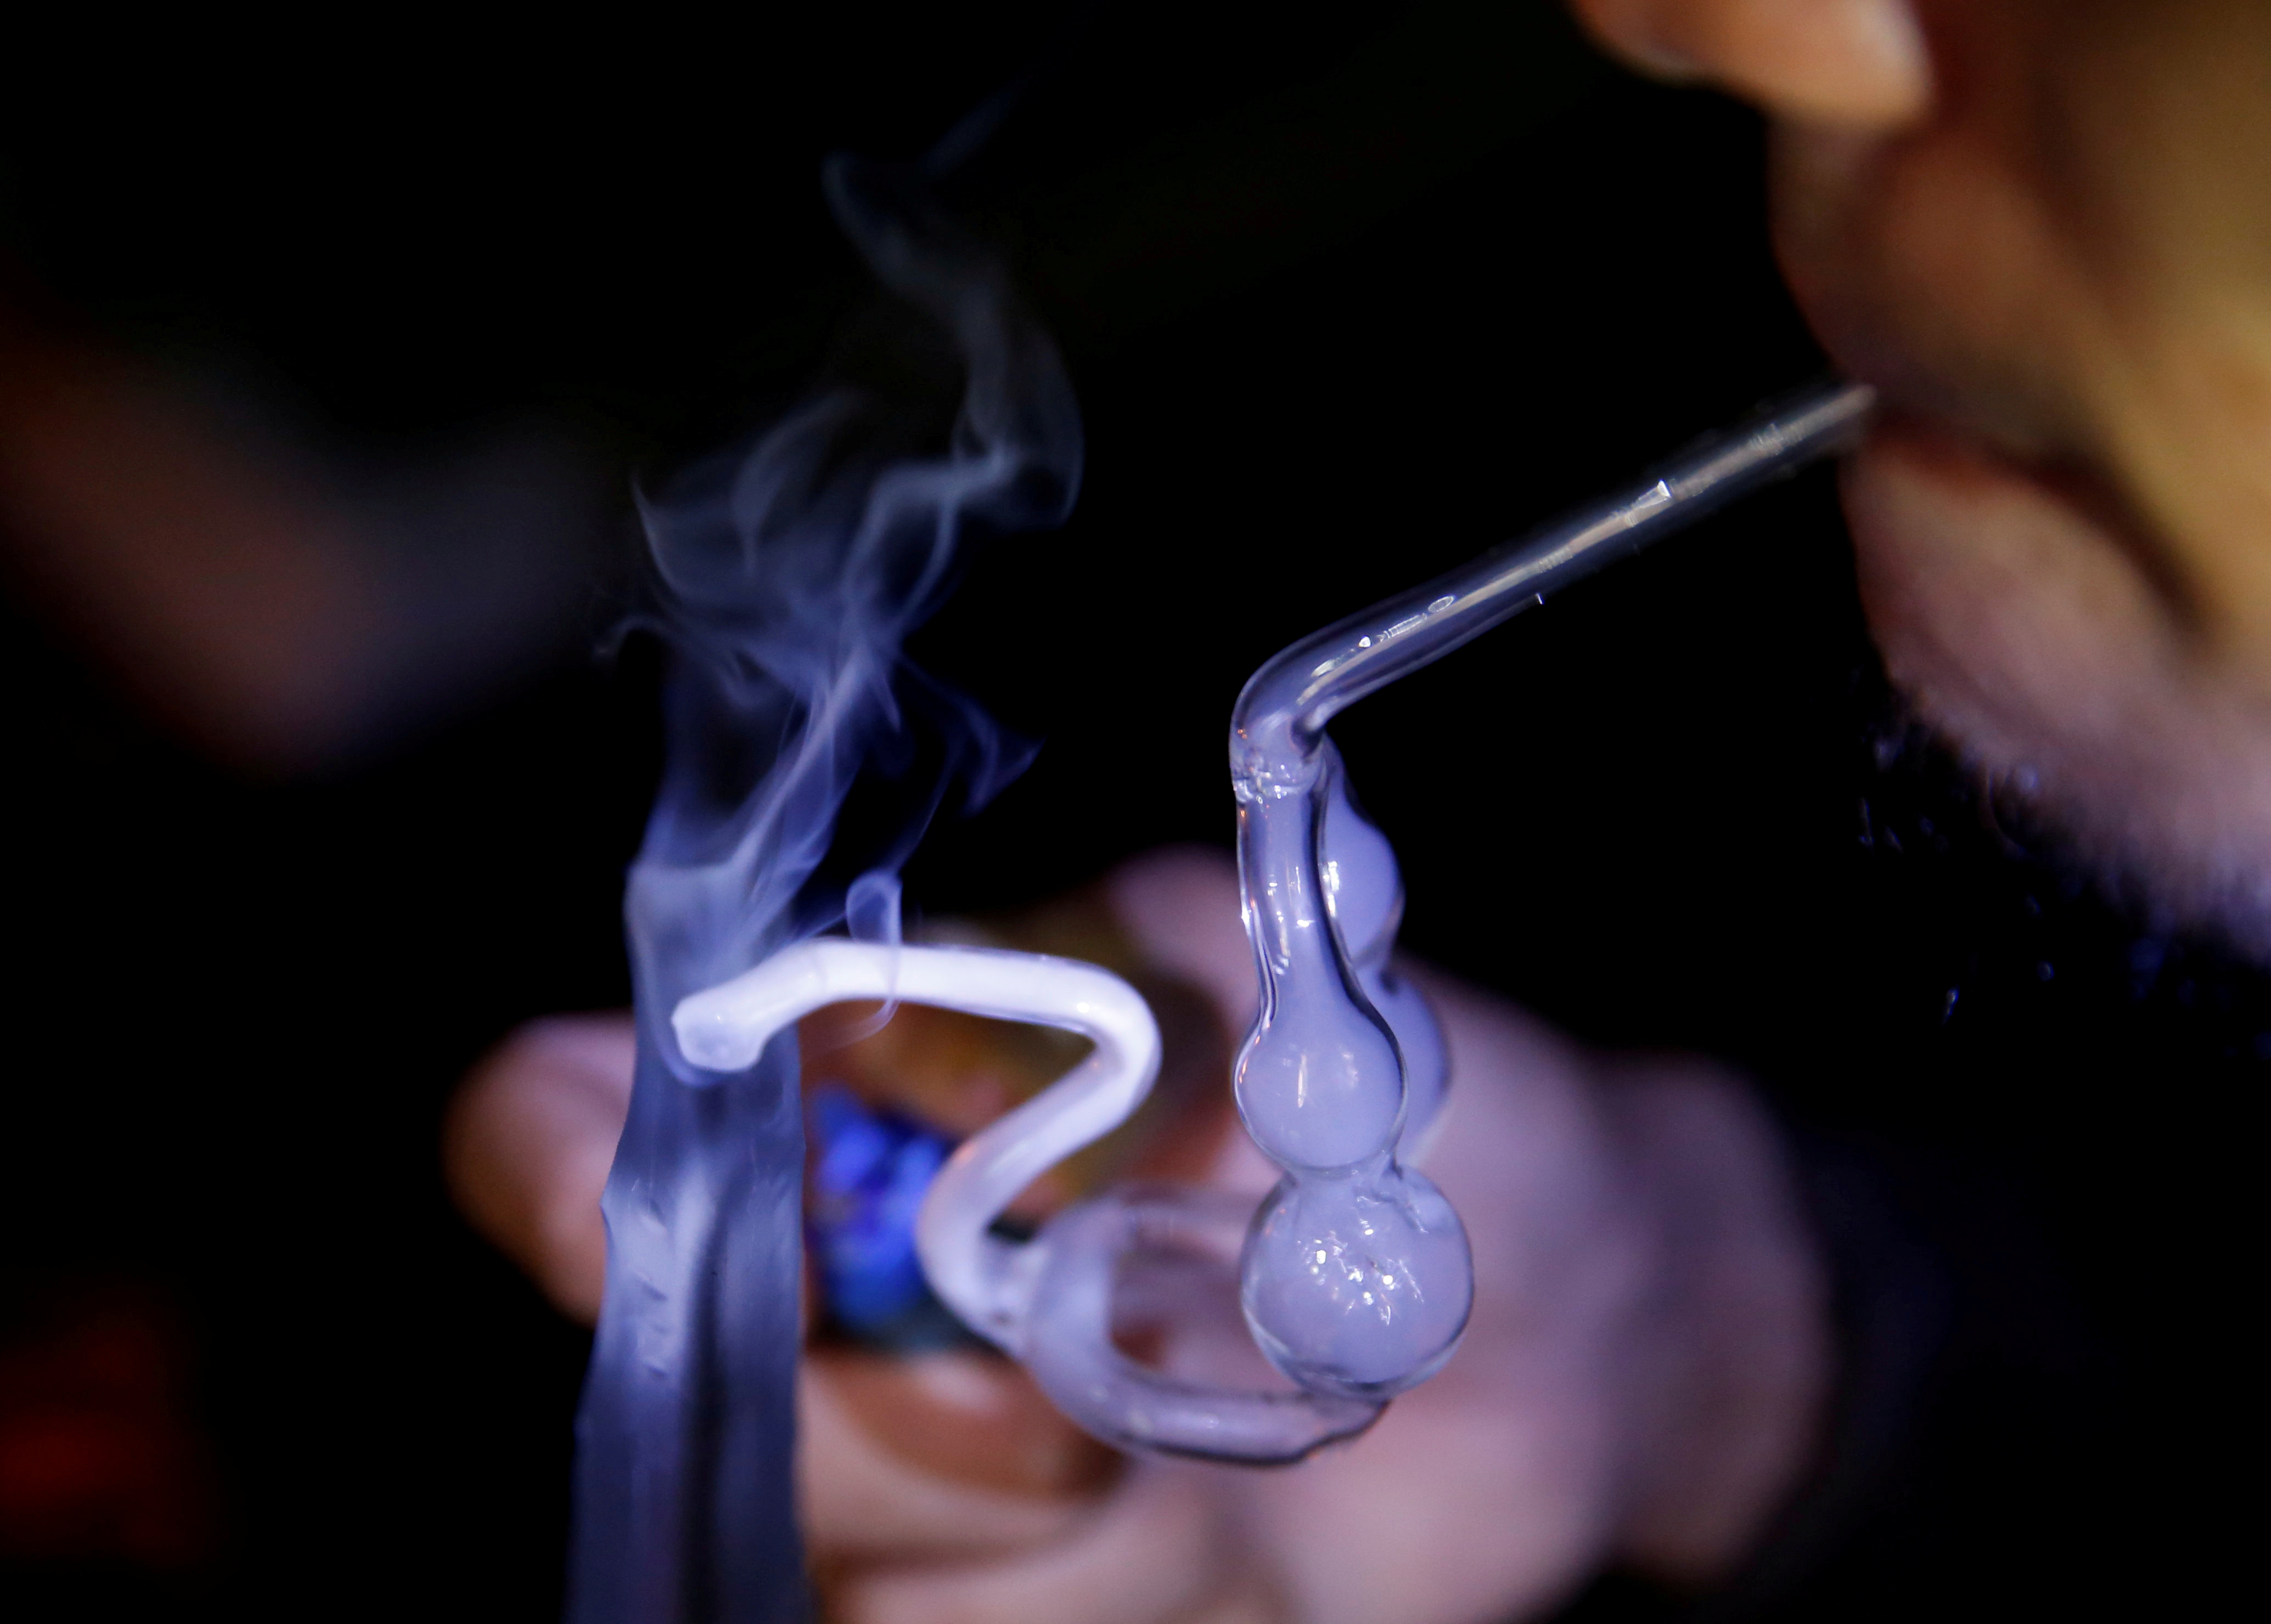 A drug addict uses a glass water pipe to smoke <em>shabu</em>, or methamphetamine, at an undisclosed drug den in Manila on June 20, 2016 (Reuters Staff—Reuters)